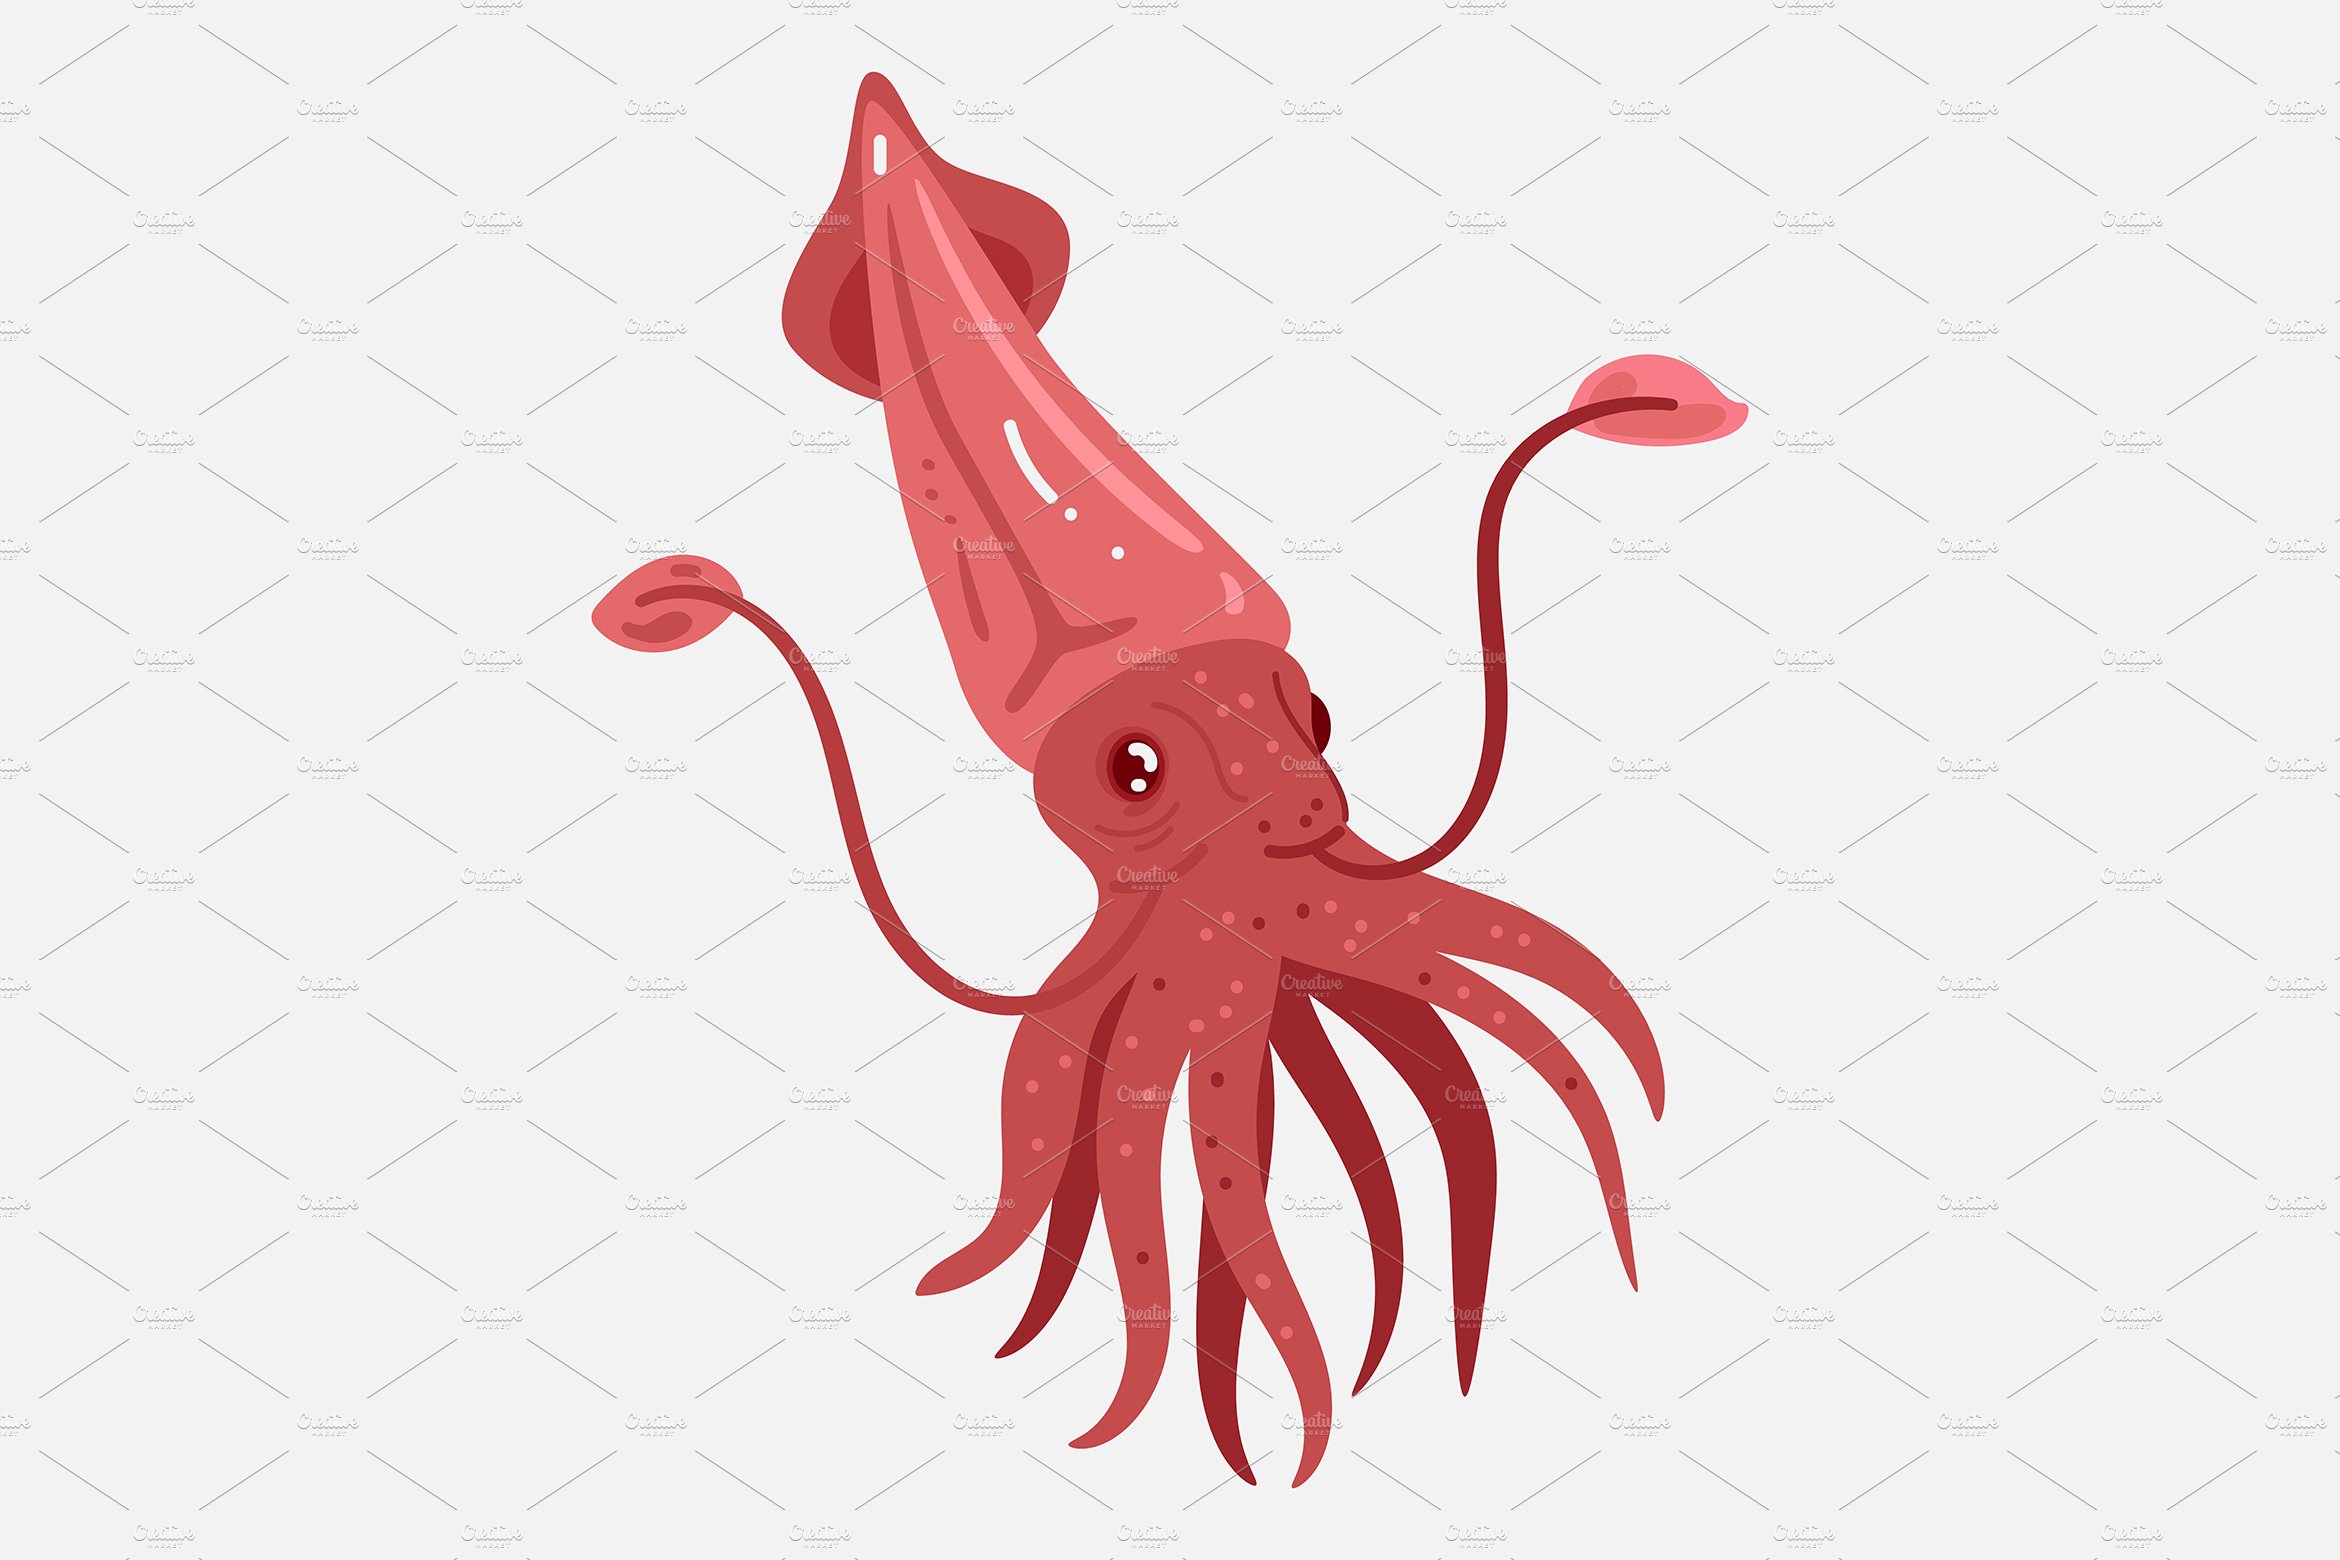 Flat Giant Squid Illustration cover image.